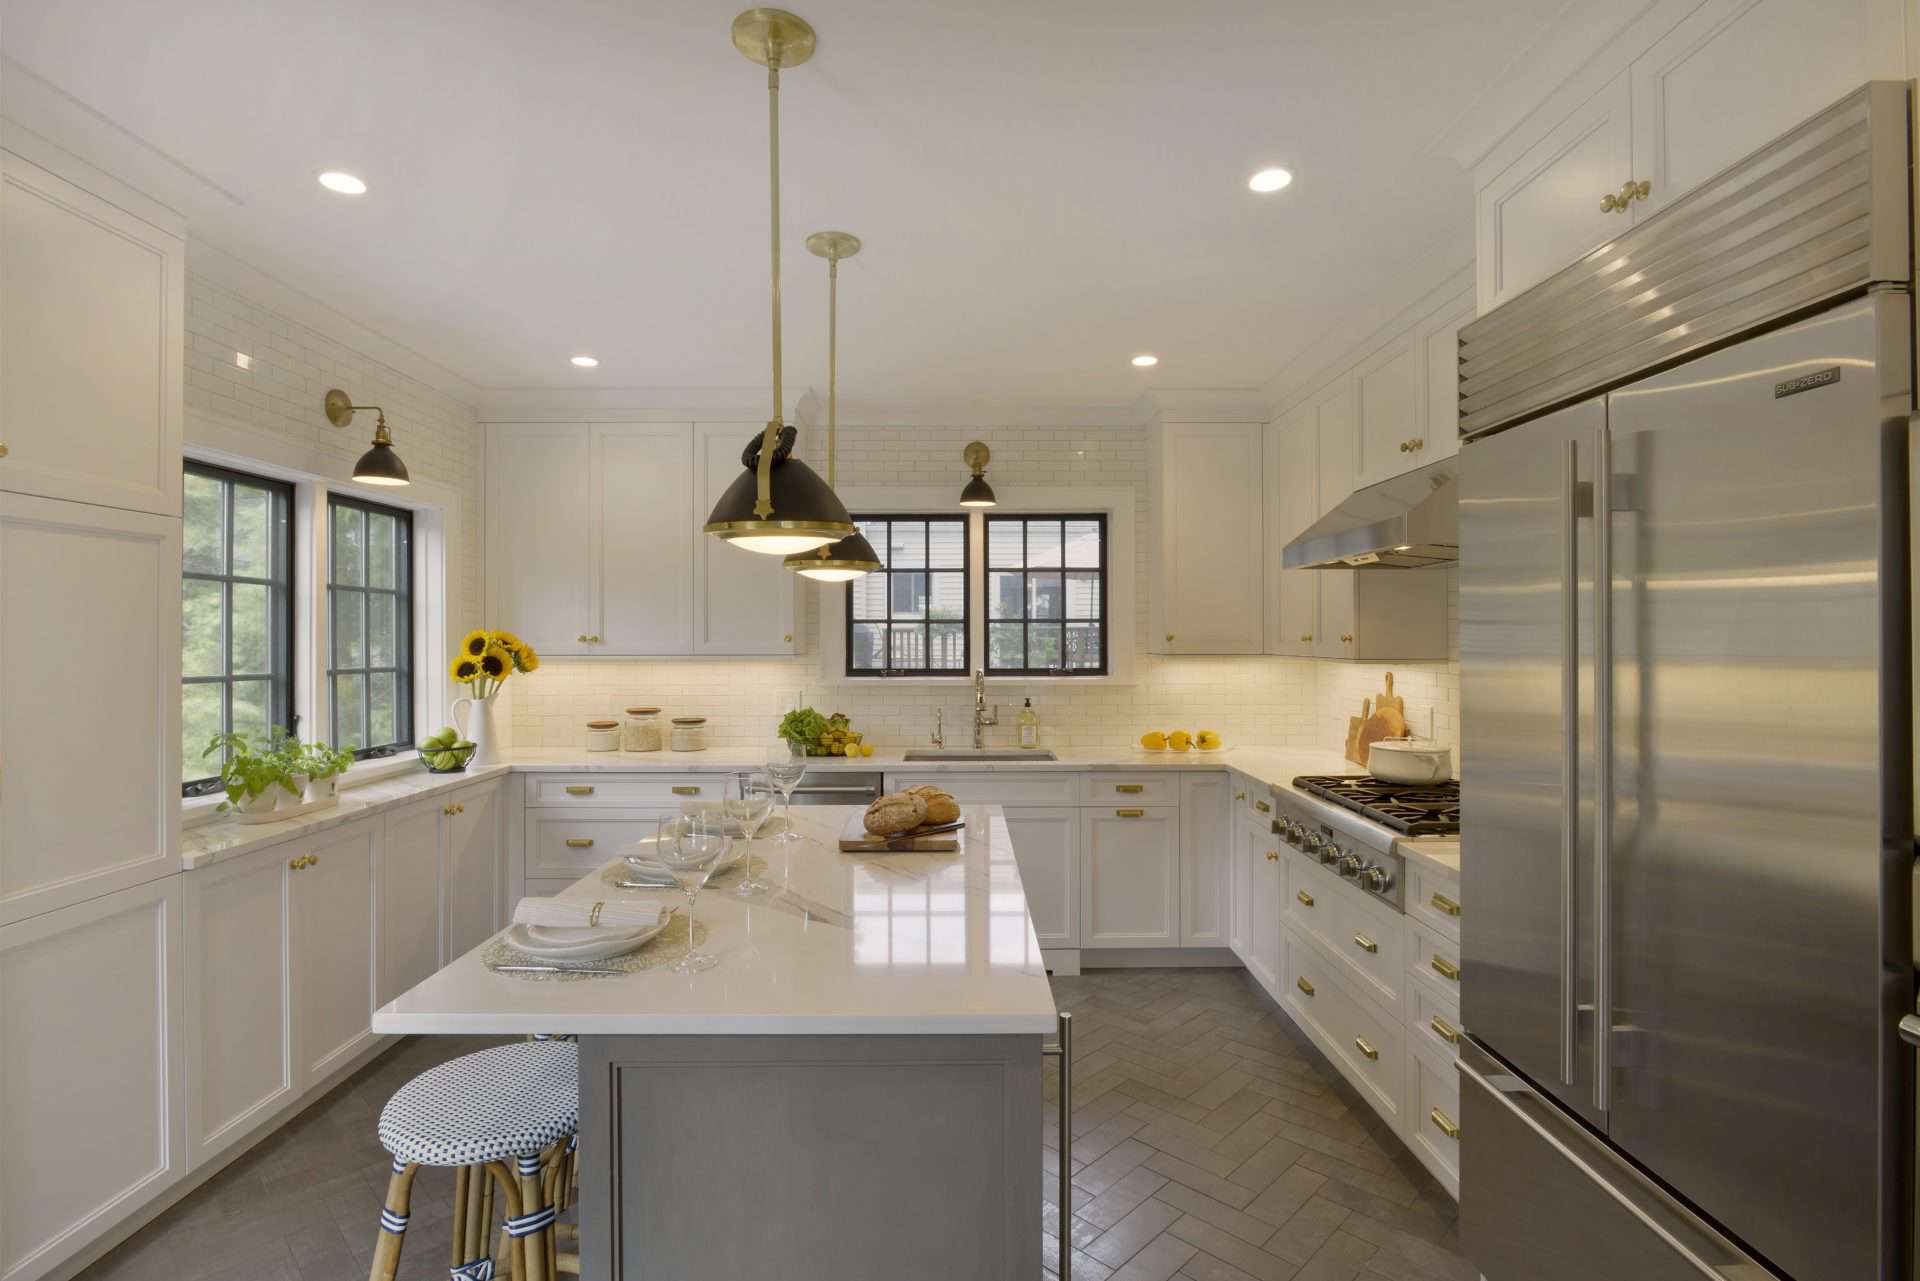 Tarrytown NY kitchen features white Caesarstone topped white NAC cabinetry, herringbone floor tile. and black and brass accents.